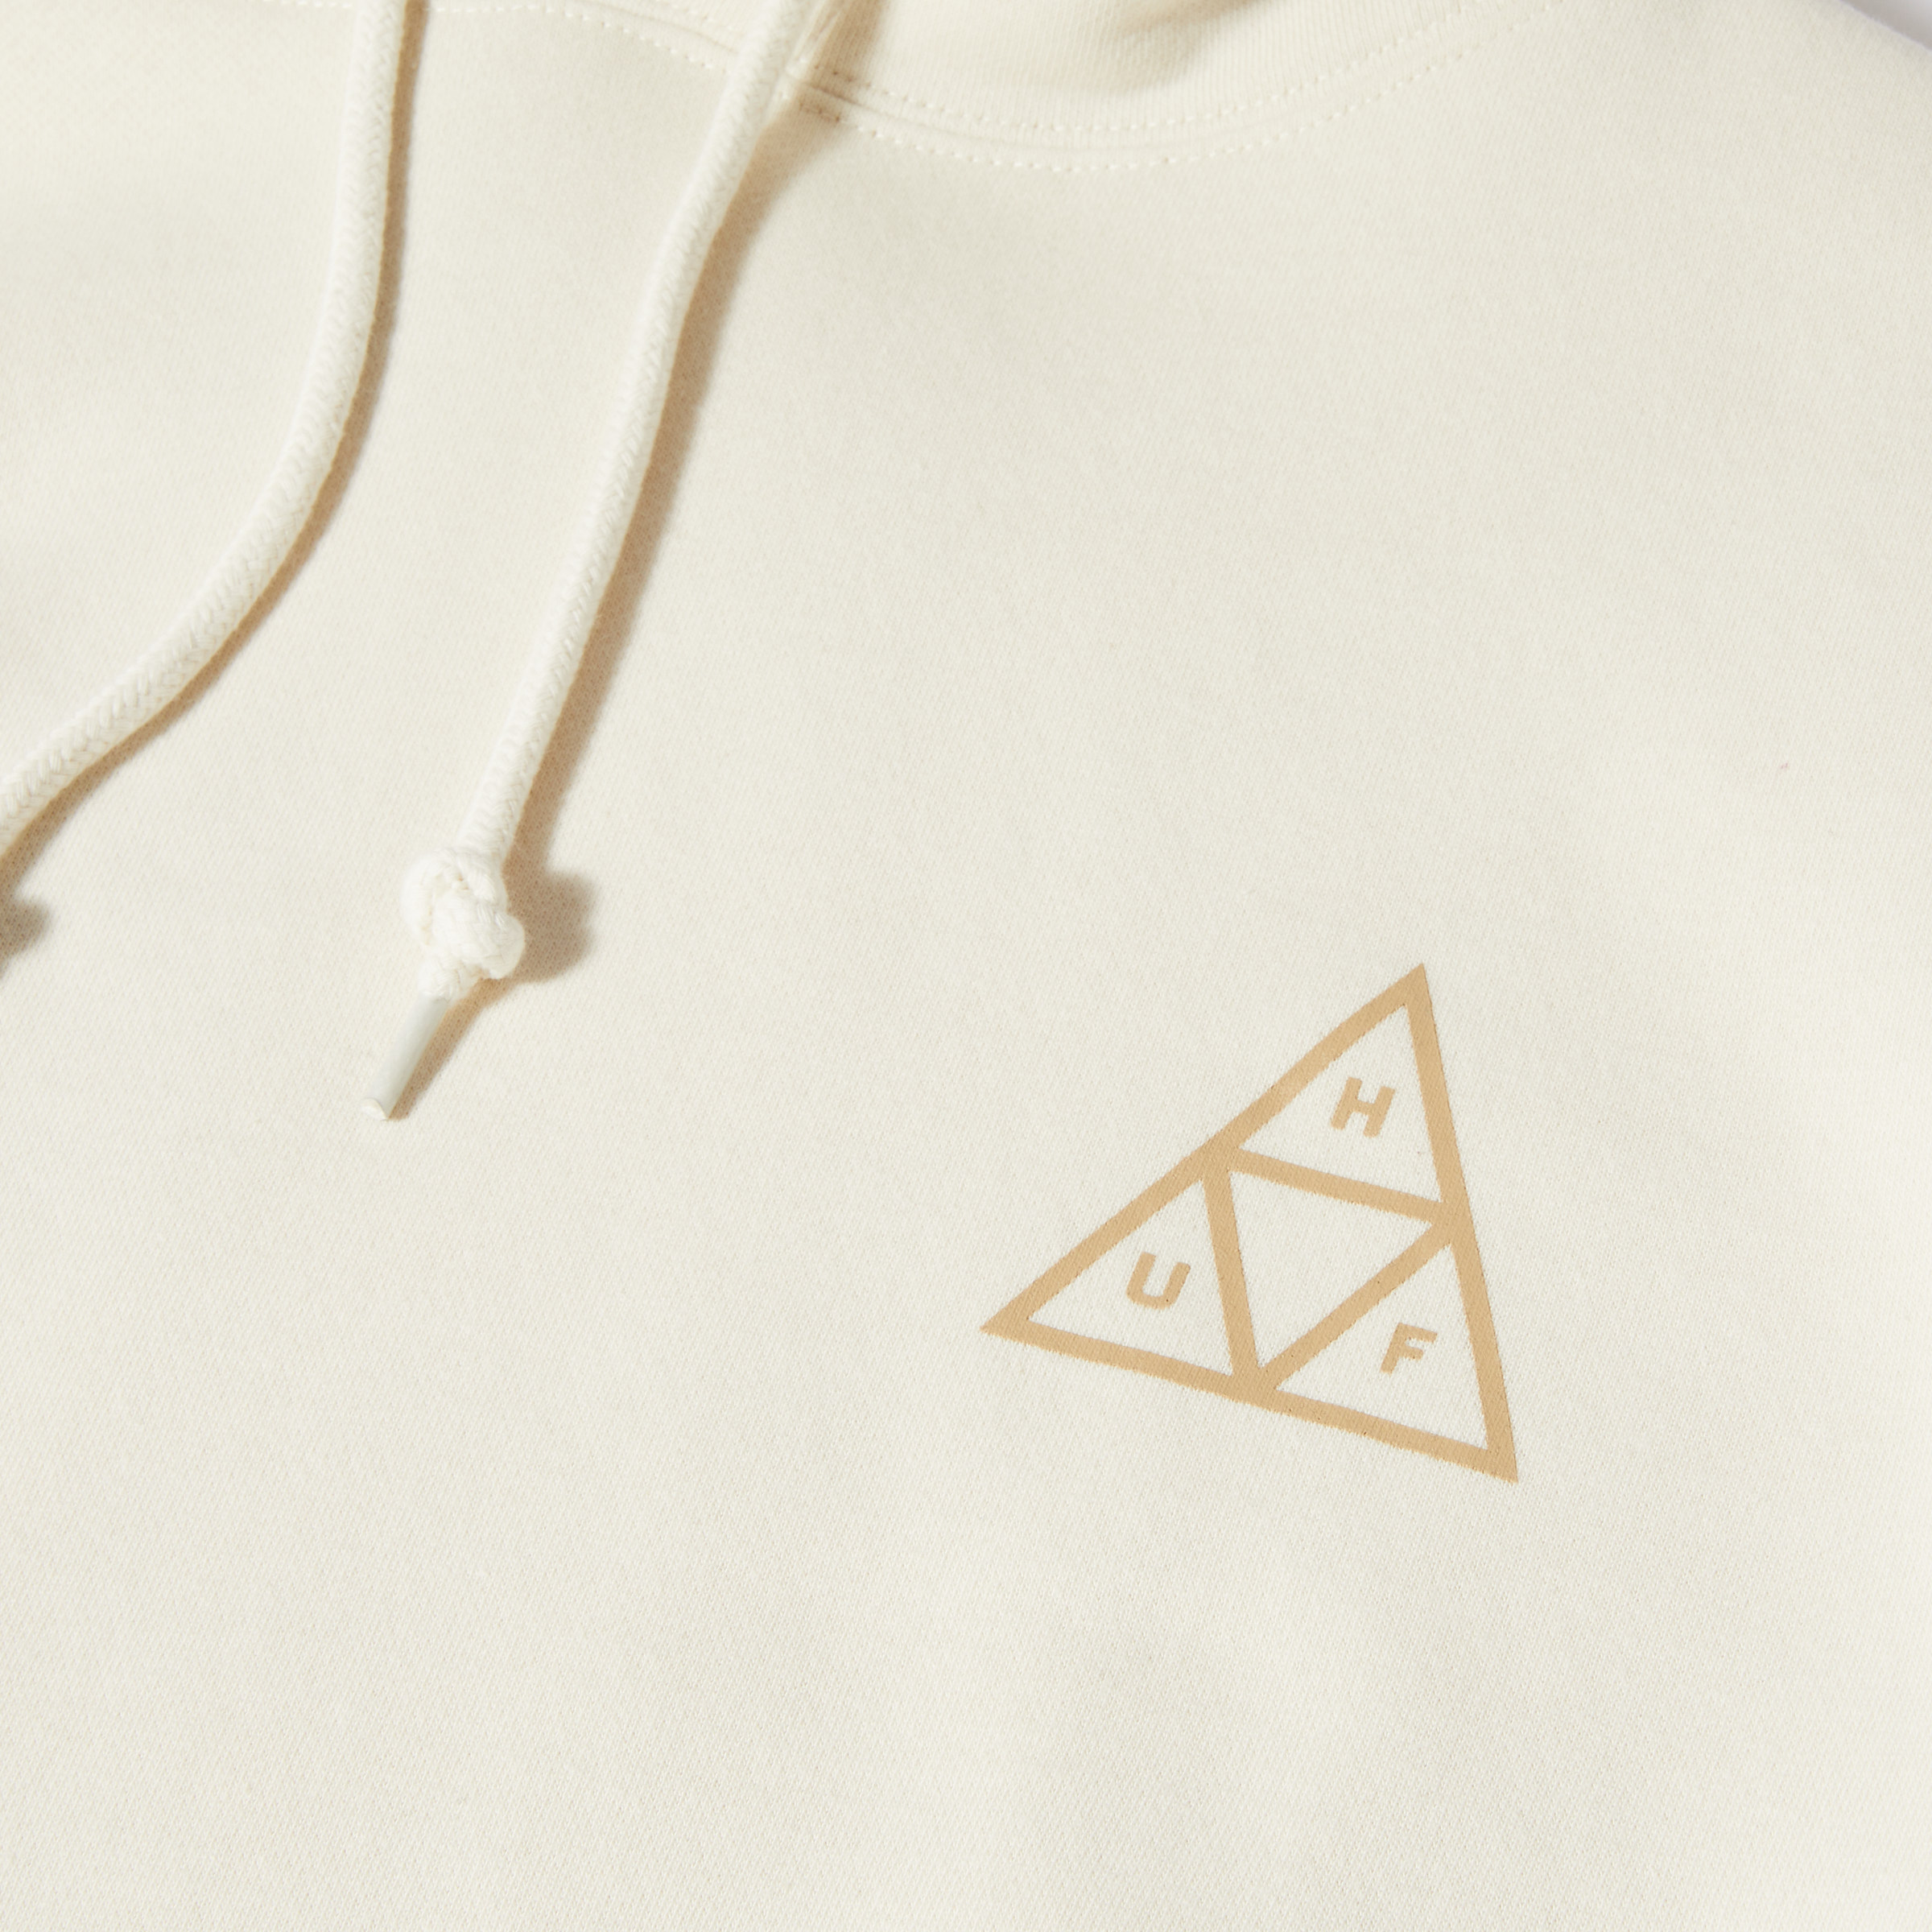 HUF Essentials Triple Triangle Pullover Hoodie - Supereight